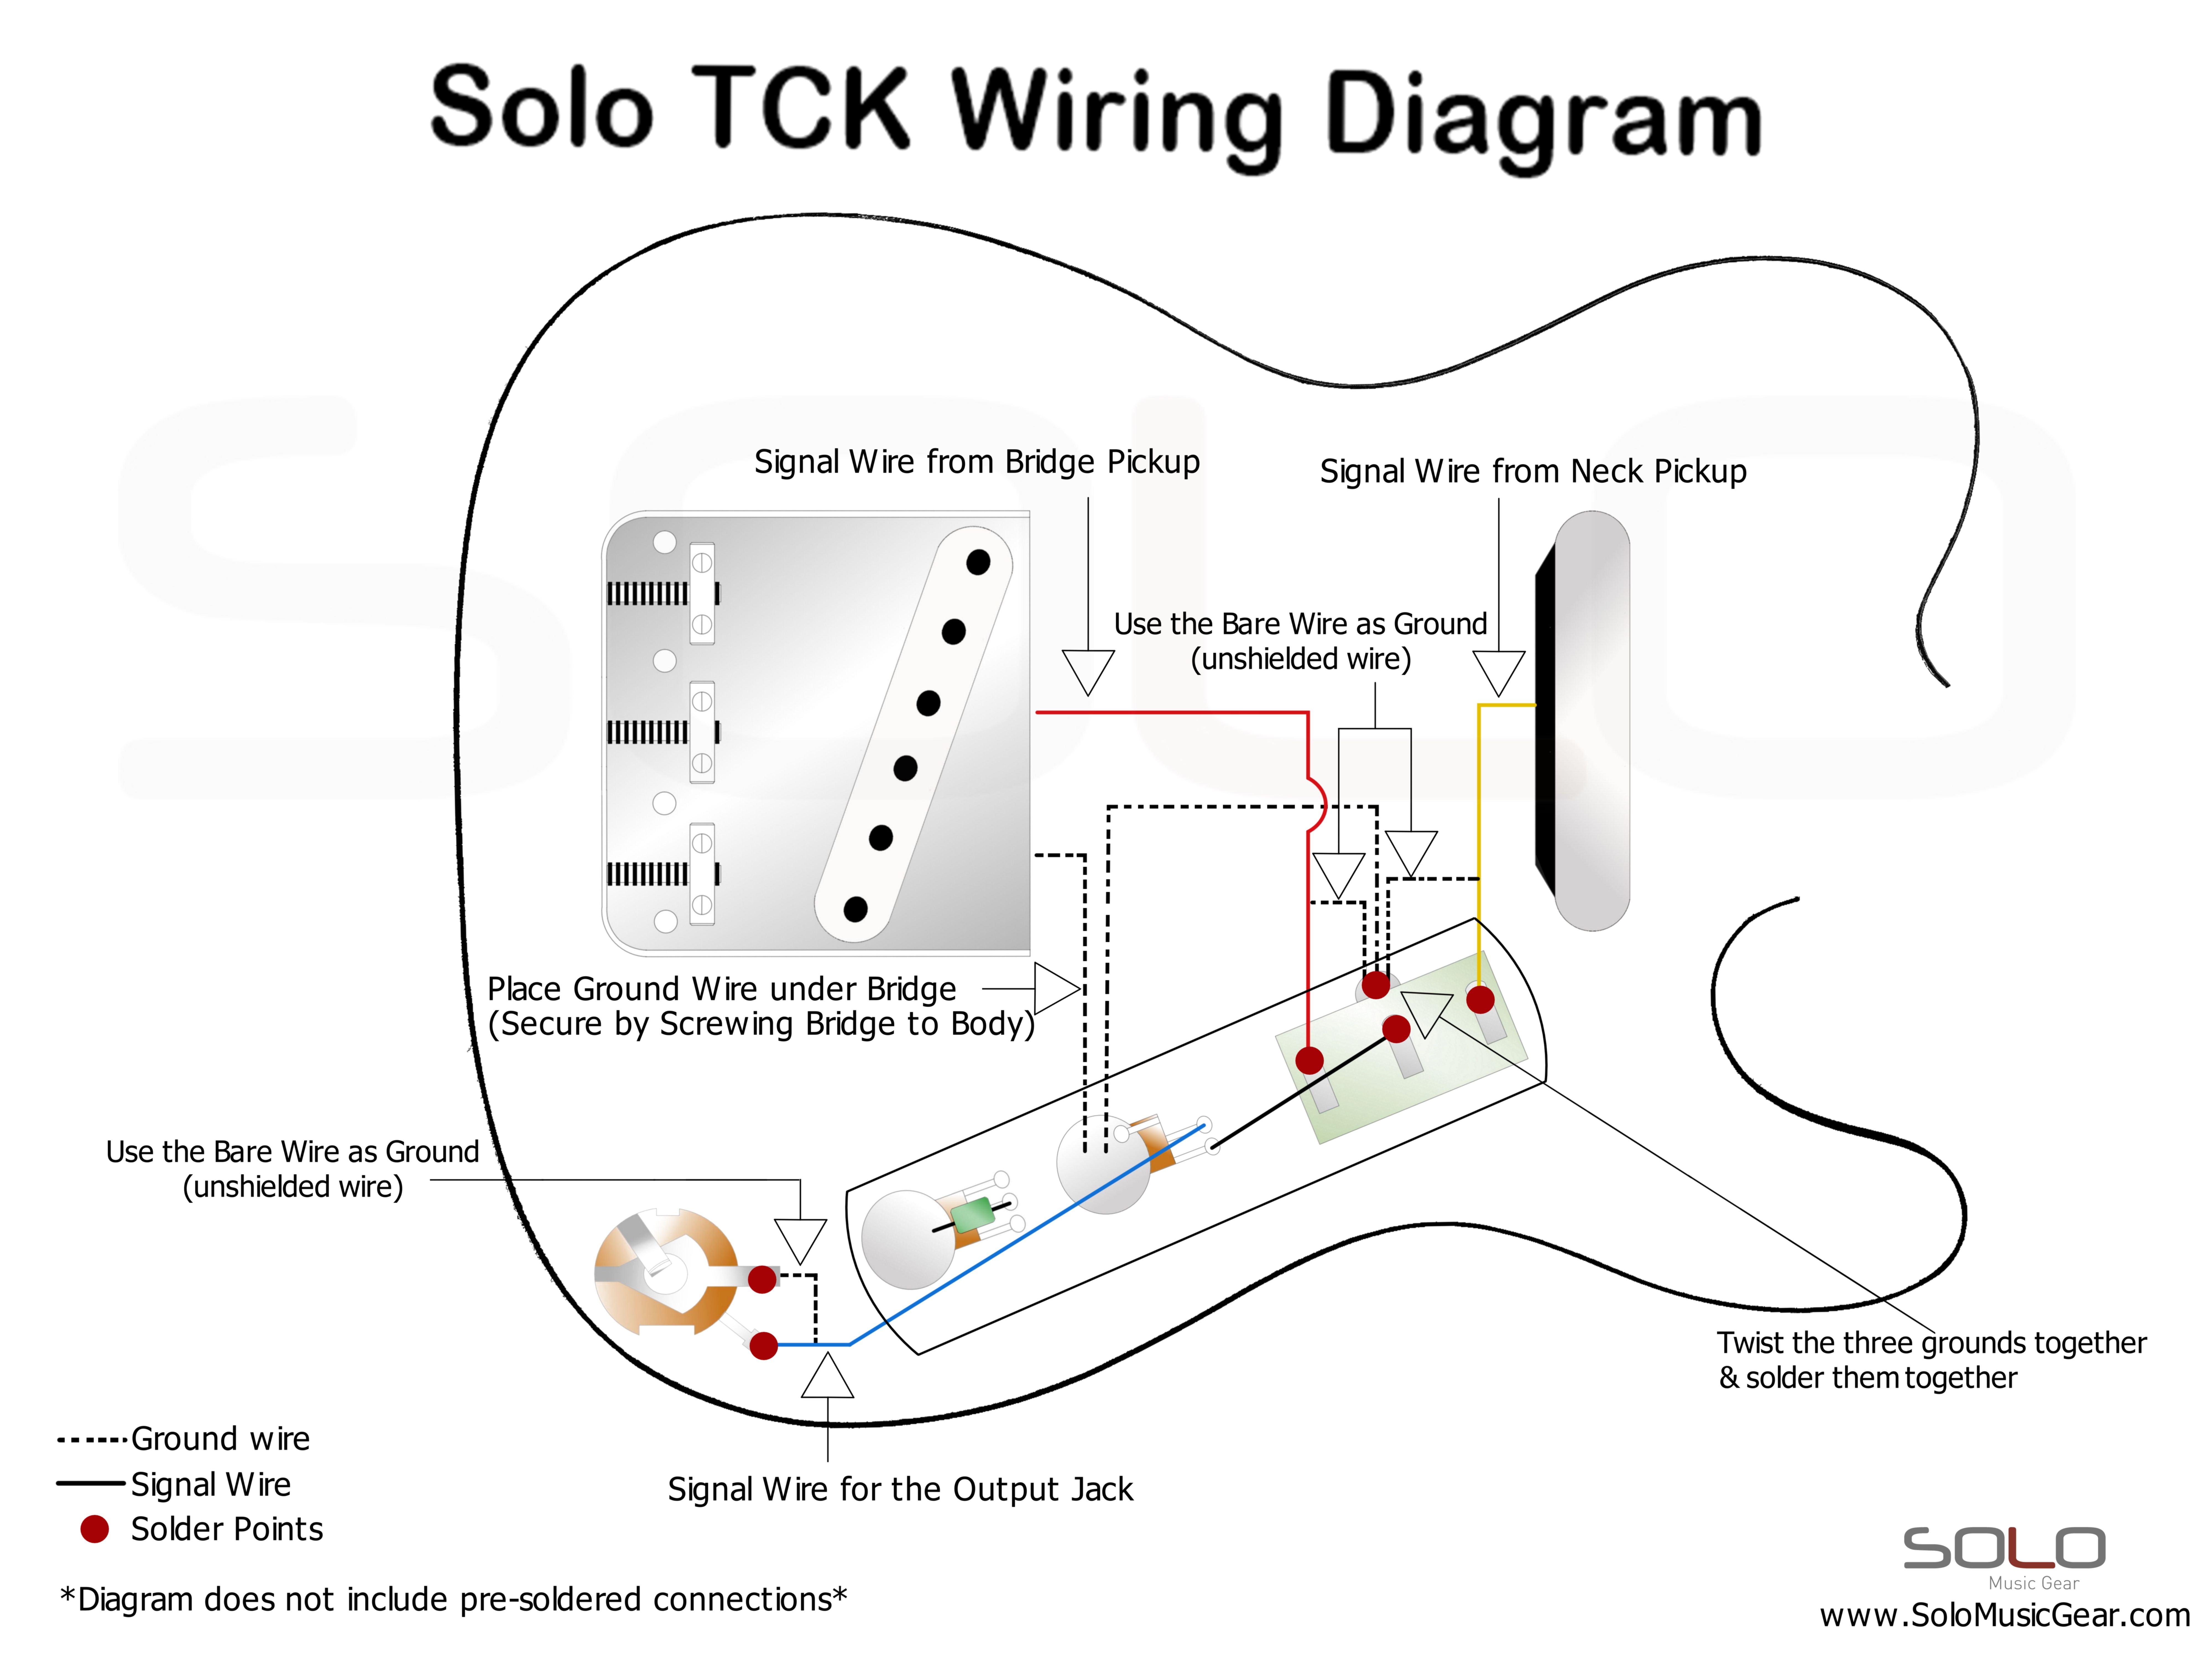 American Standard Telecaster Wiring Diagram from www.solomusicgear.com